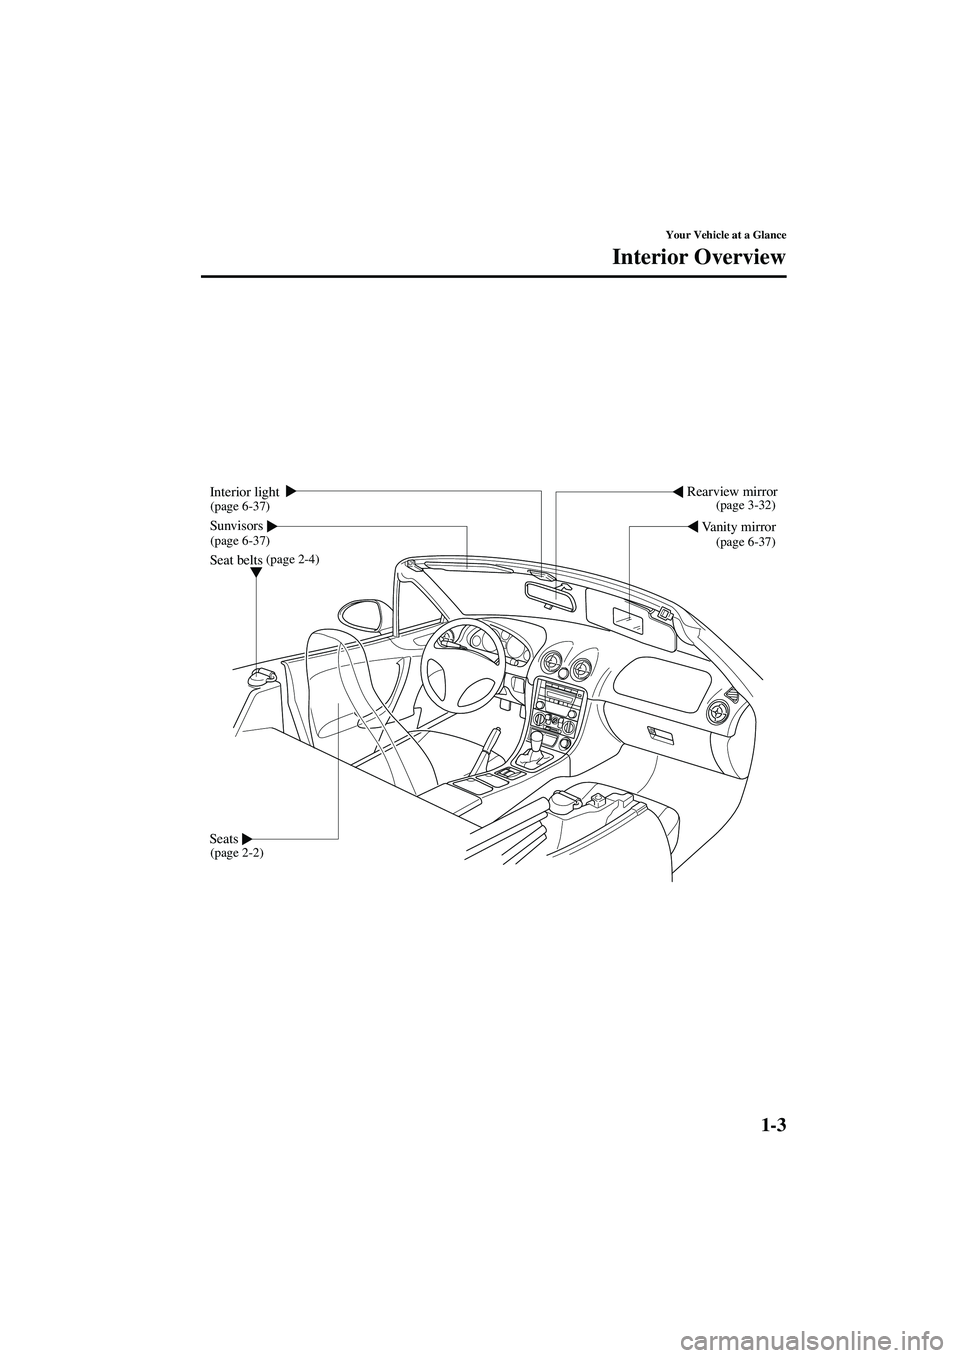 MAZDA MODEL MX-5 MIATA 2003  Owners Manual 1-3
Your Vehicle at a Glance
Form No. 8R09-EA-02G
Interior Overview
Vanity mirror
Rearview mirror
Seat beltsInterior light
Sunvisors
Seats
(page 6-37)
(page 6-37) (page 2-4)
(page 2-2) (page 6-37) (pa